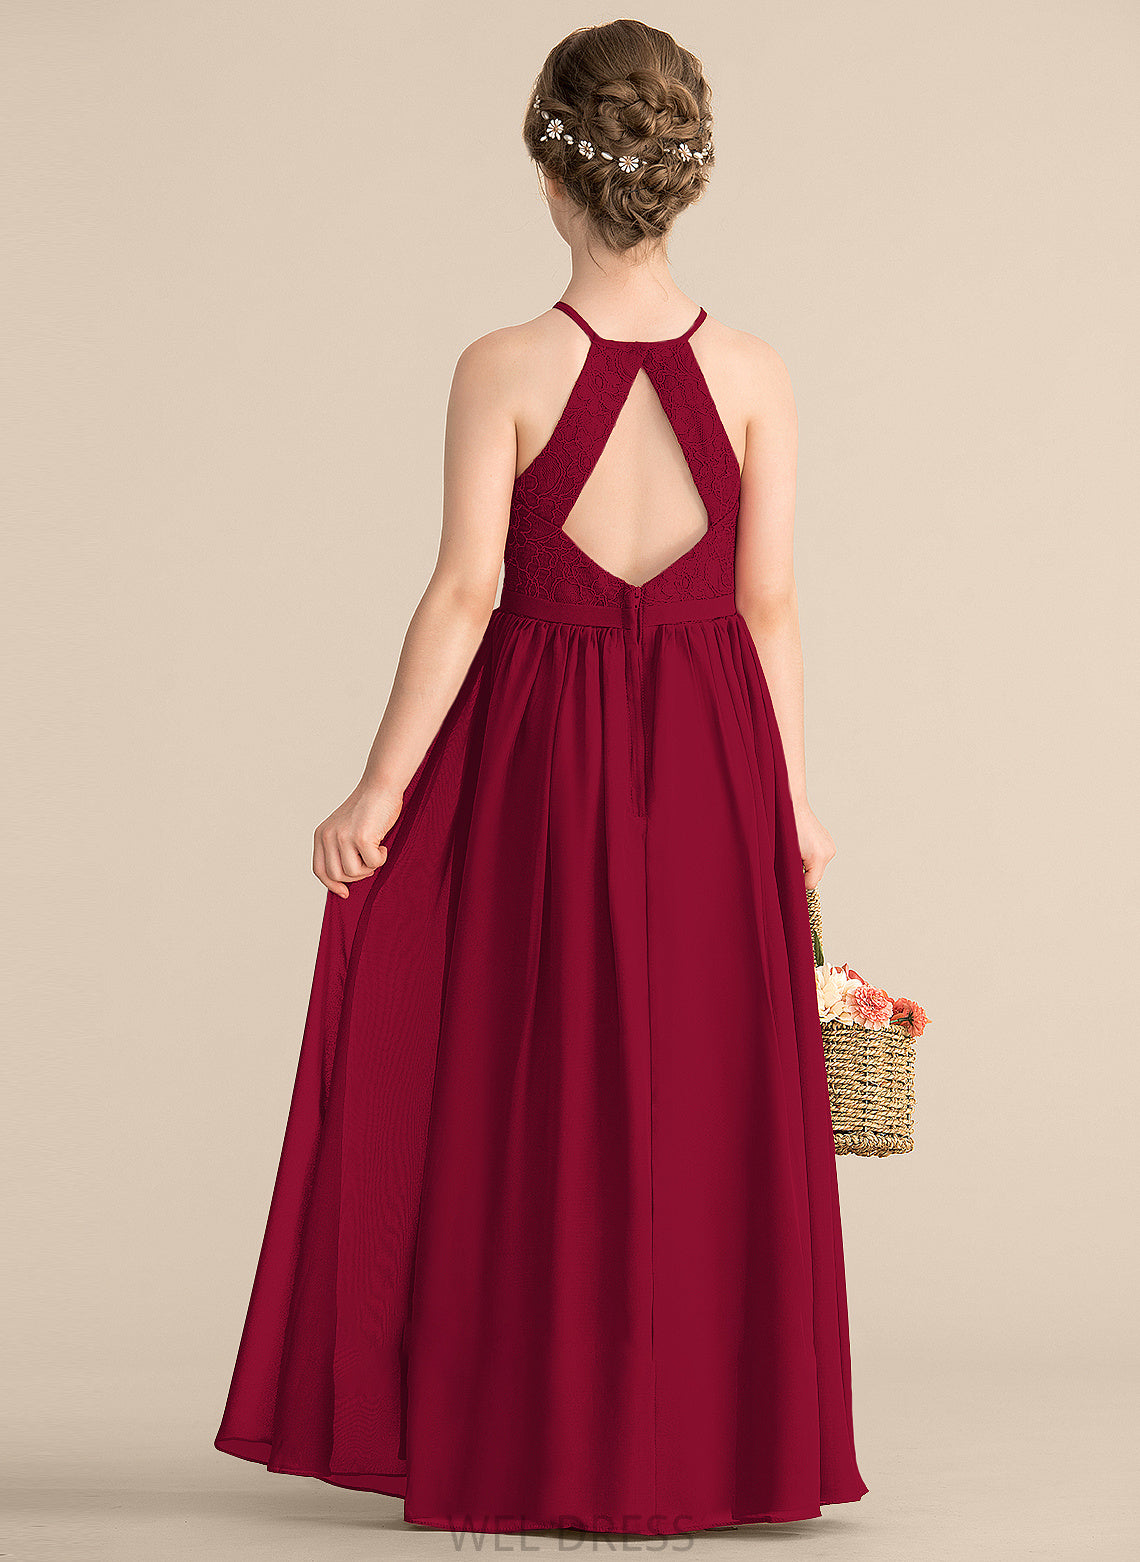 A-Line Junior Bridesmaid Dresses Lace With Floor-Length Split Chiffon Front Scoop Marin Neck